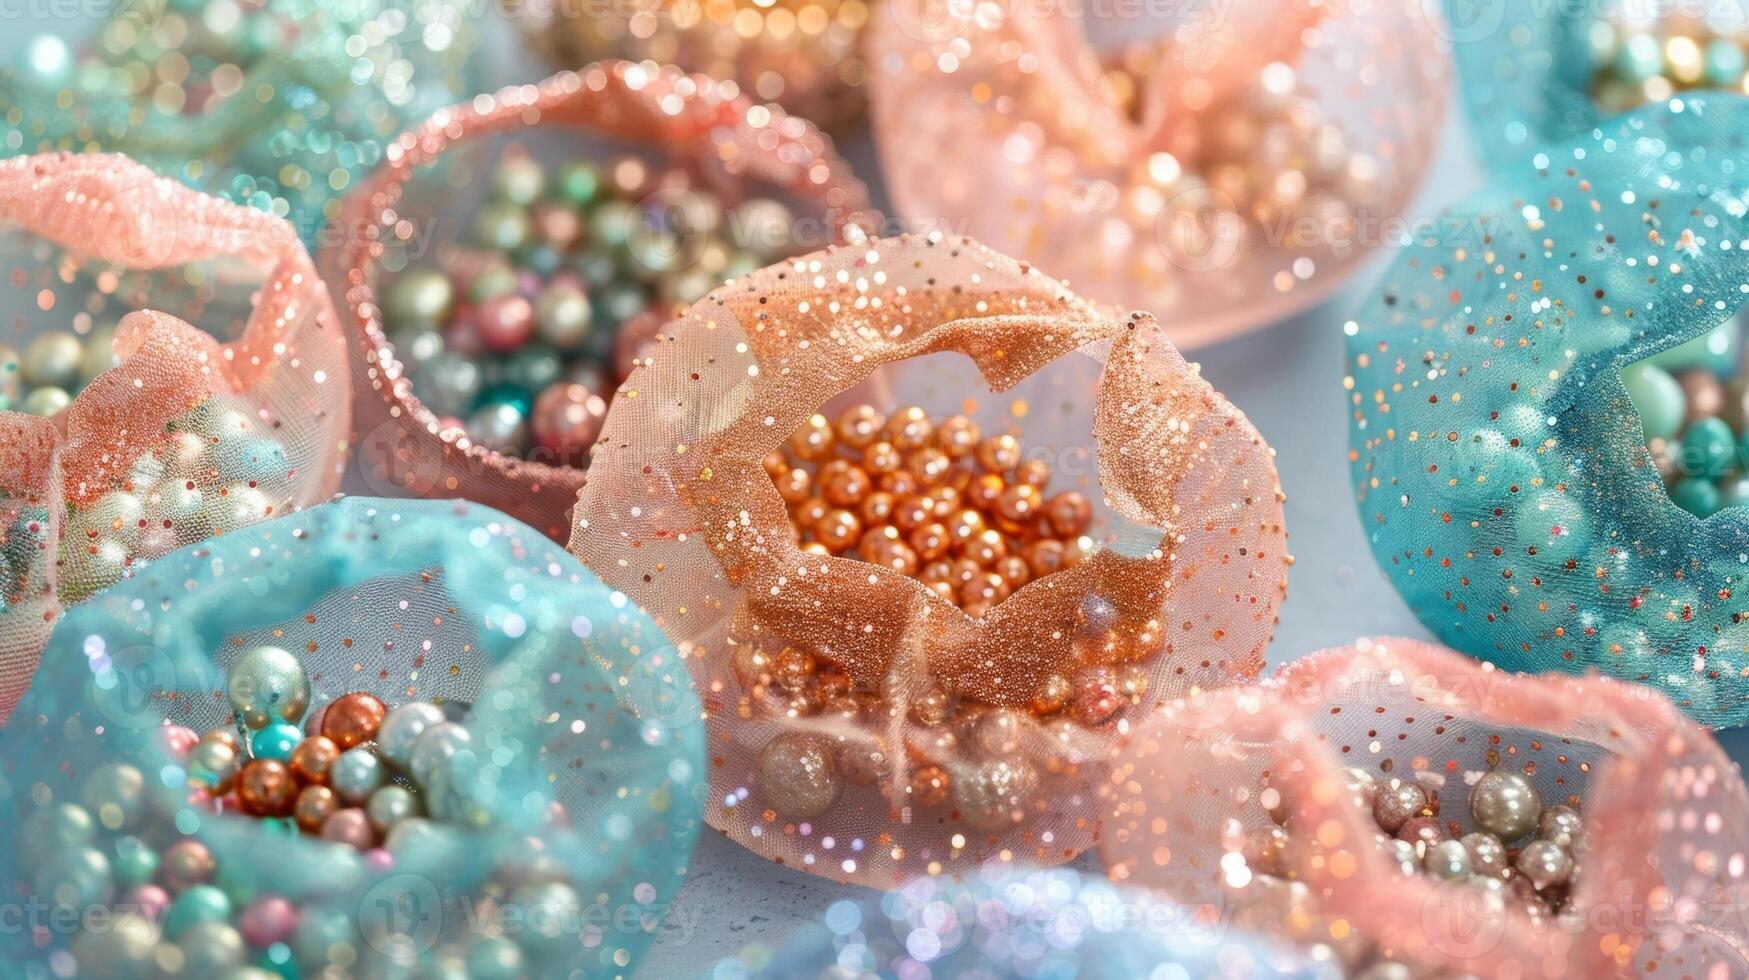 A set of small round mesh bags filled with beads and glitter used for adding unique embellishments to glazed surfaces. photo